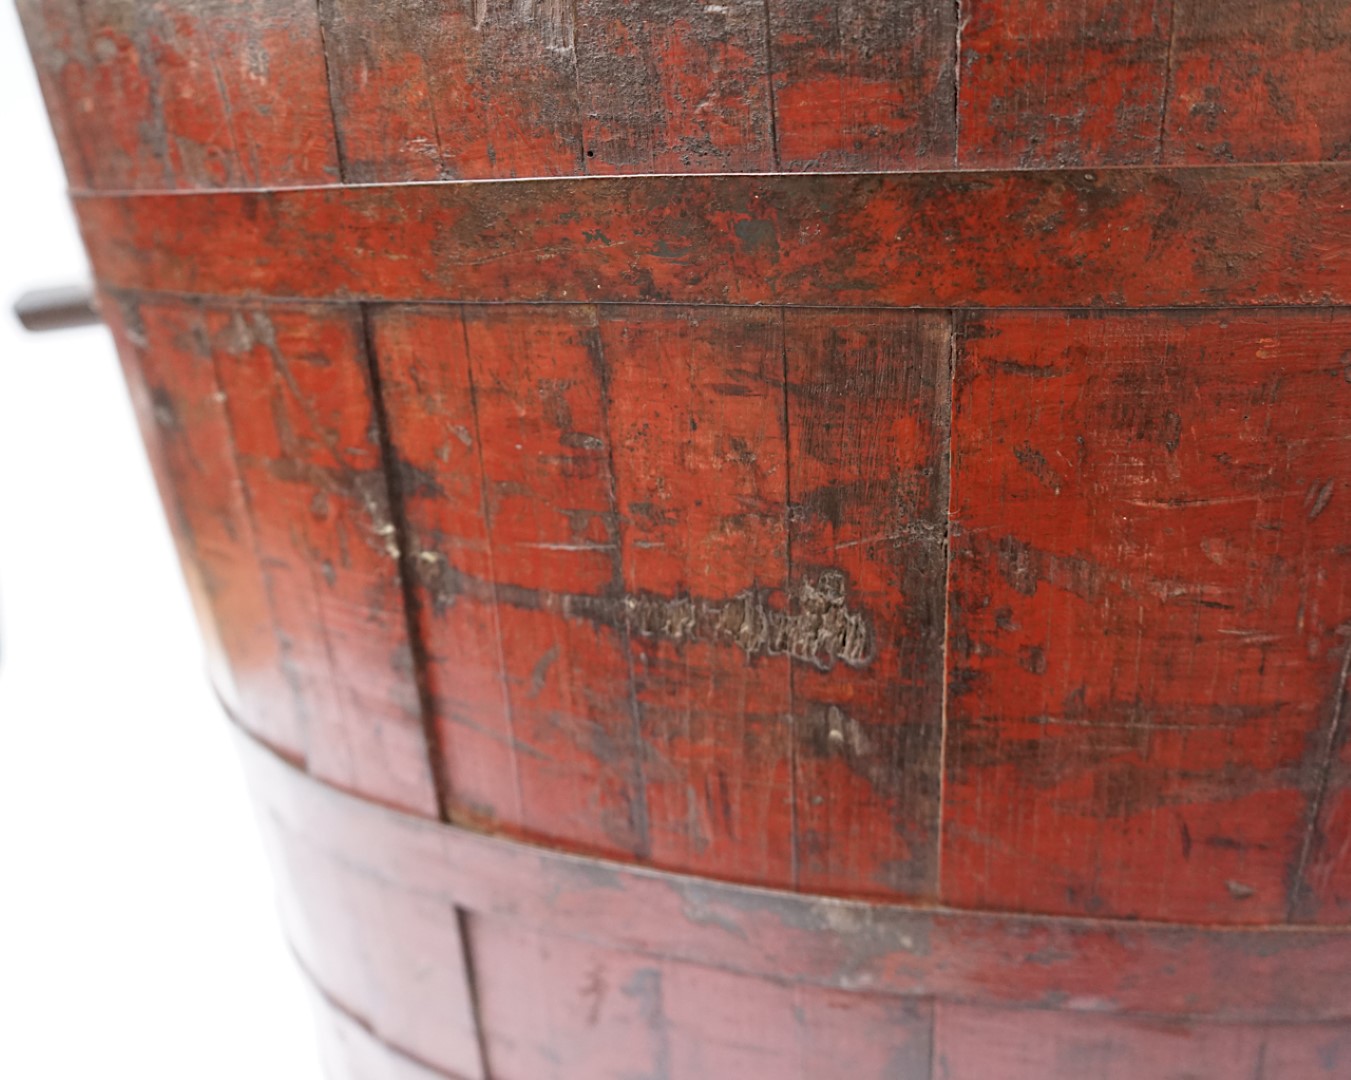 A FRENCH PAINTED STAVED WINE TREADING BASKET OR BUCKET - Image 9 of 11